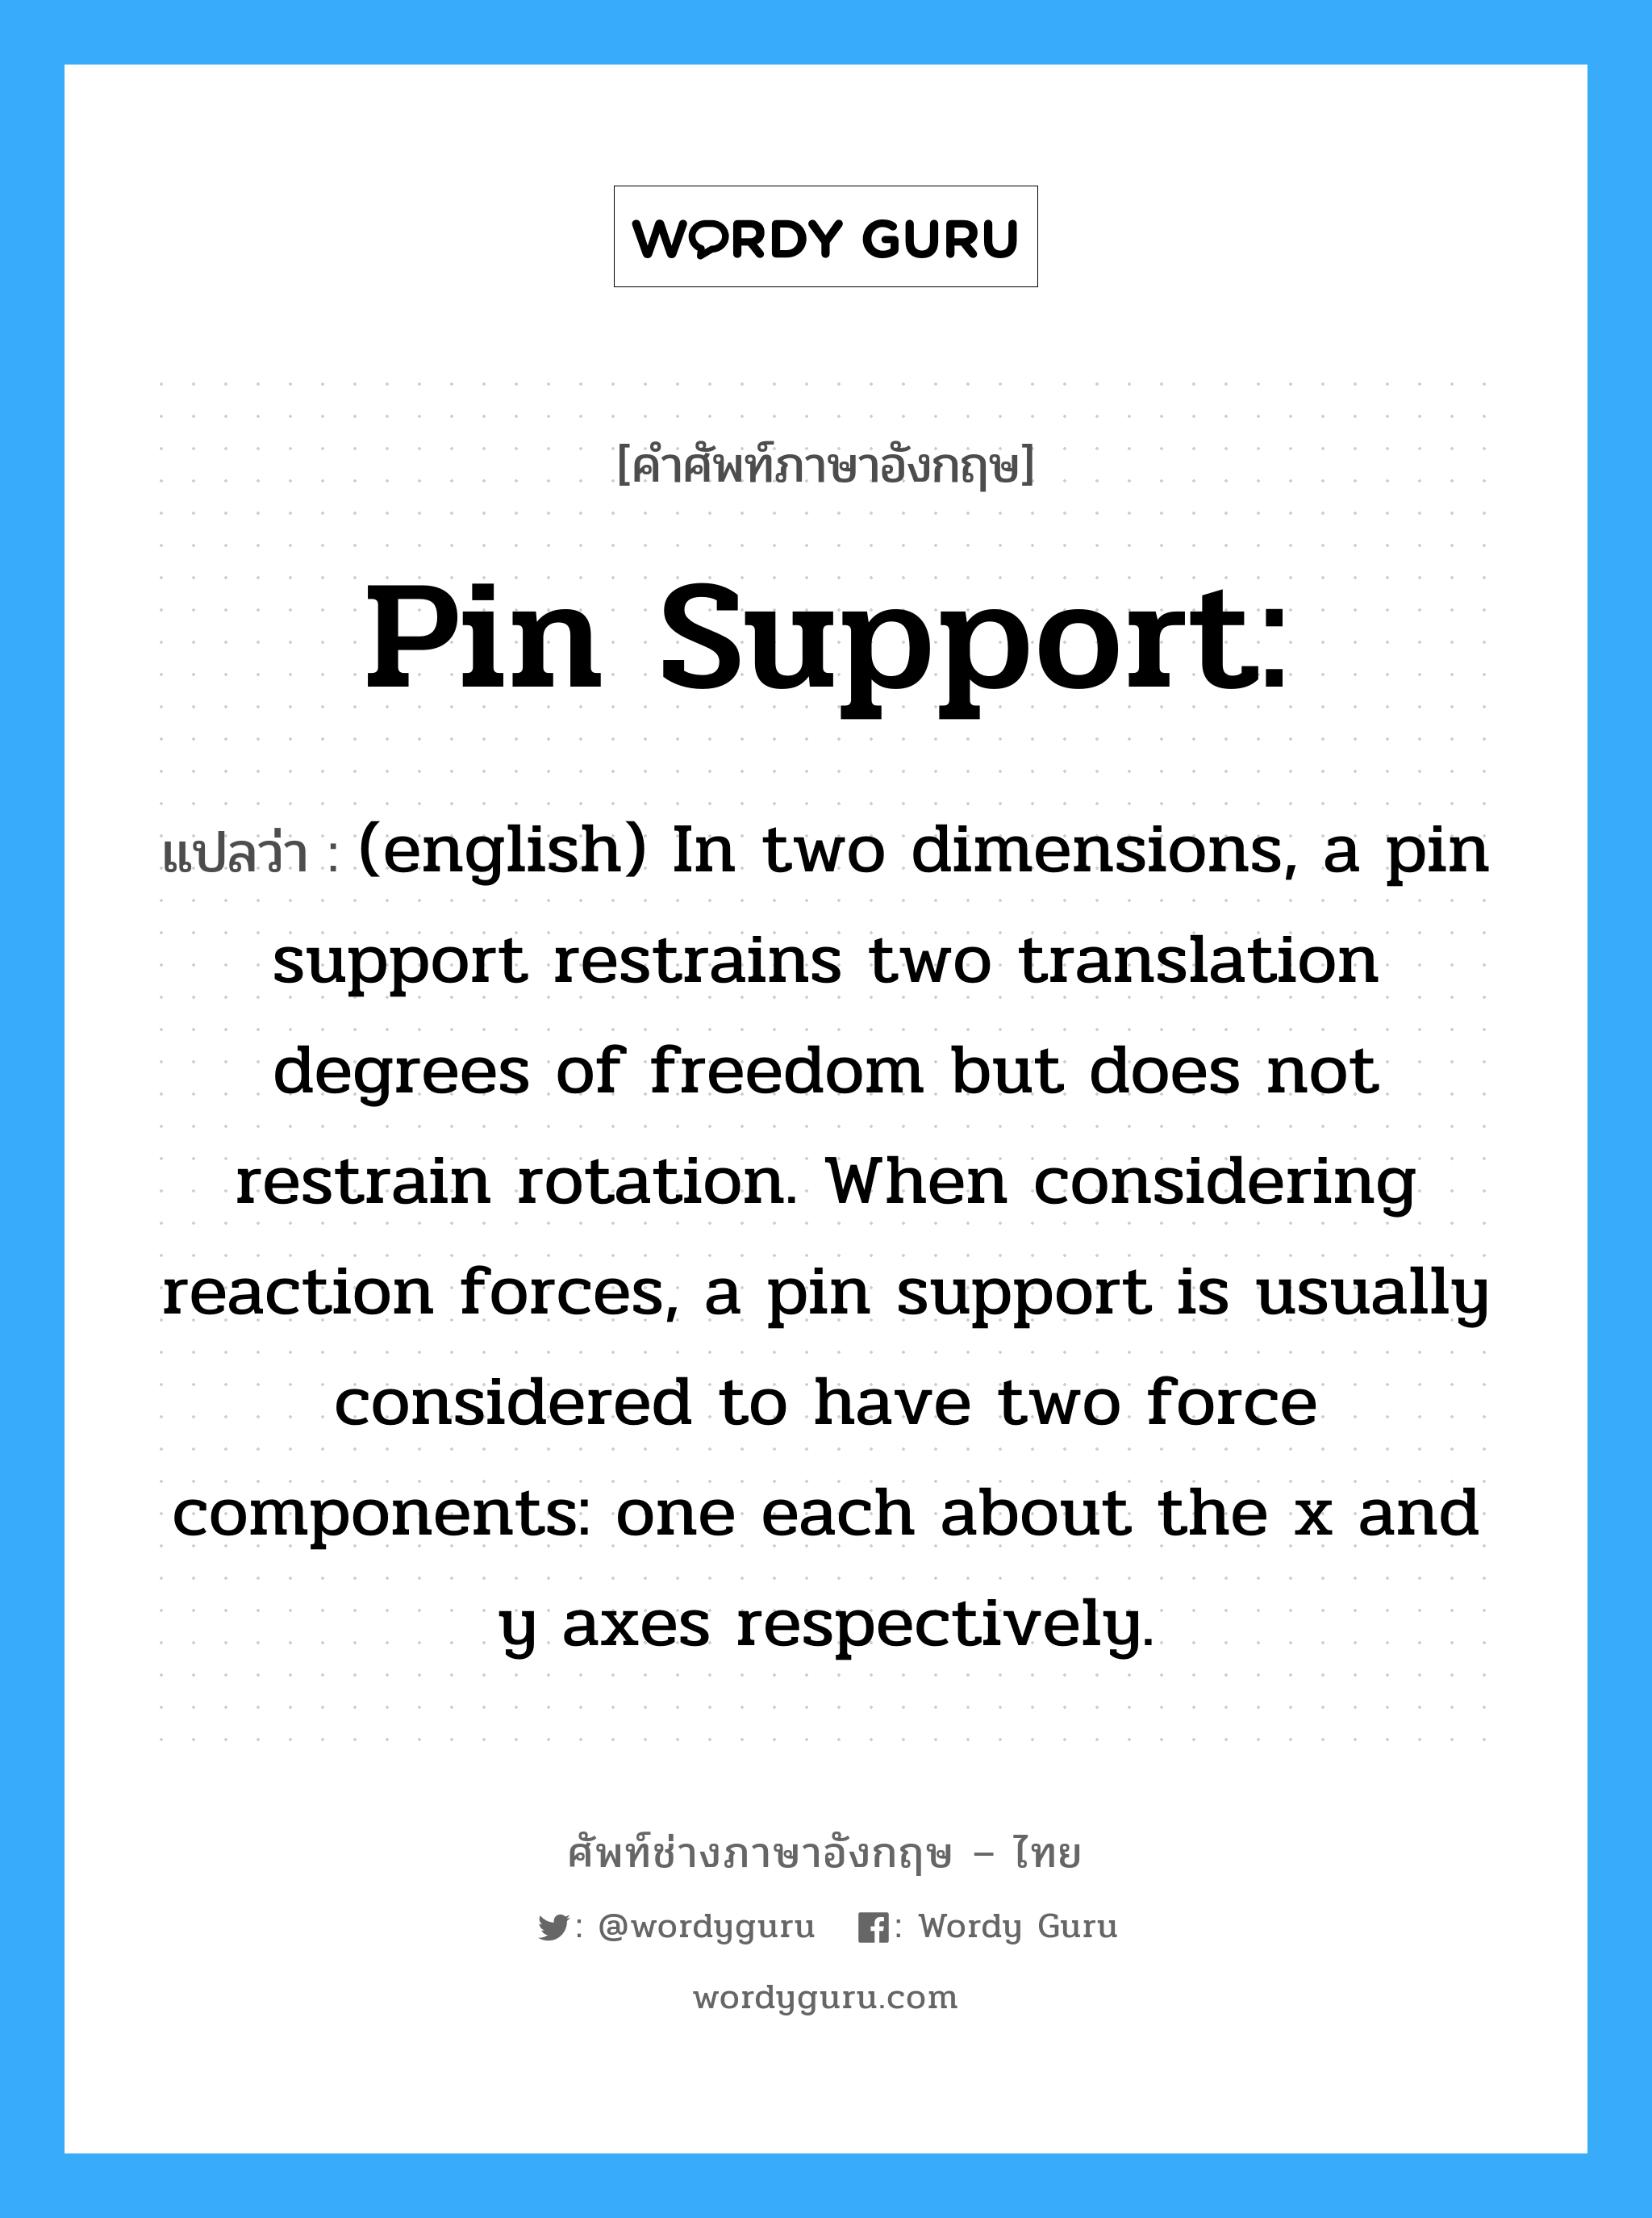 (english) In two dimensions, a pin support restrains two translation degrees of freedom but does not restrain rotation. When considering reaction forces, a pin support is usually considered to have two force components: one each about the x and y axes respectively. ภาษาอังกฤษ?, คำศัพท์ช่างภาษาอังกฤษ - ไทย (english) In two dimensions, a pin support restrains two translation degrees of freedom but does not restrain rotation. When considering reaction forces, a pin support is usually considered to have two force components: one each about the x and y axes respectively. คำศัพท์ภาษาอังกฤษ (english) In two dimensions, a pin support restrains two translation degrees of freedom but does not restrain rotation. When considering reaction forces, a pin support is usually considered to have two force components: one each about the x and y axes respectively. แปลว่า Pin support: